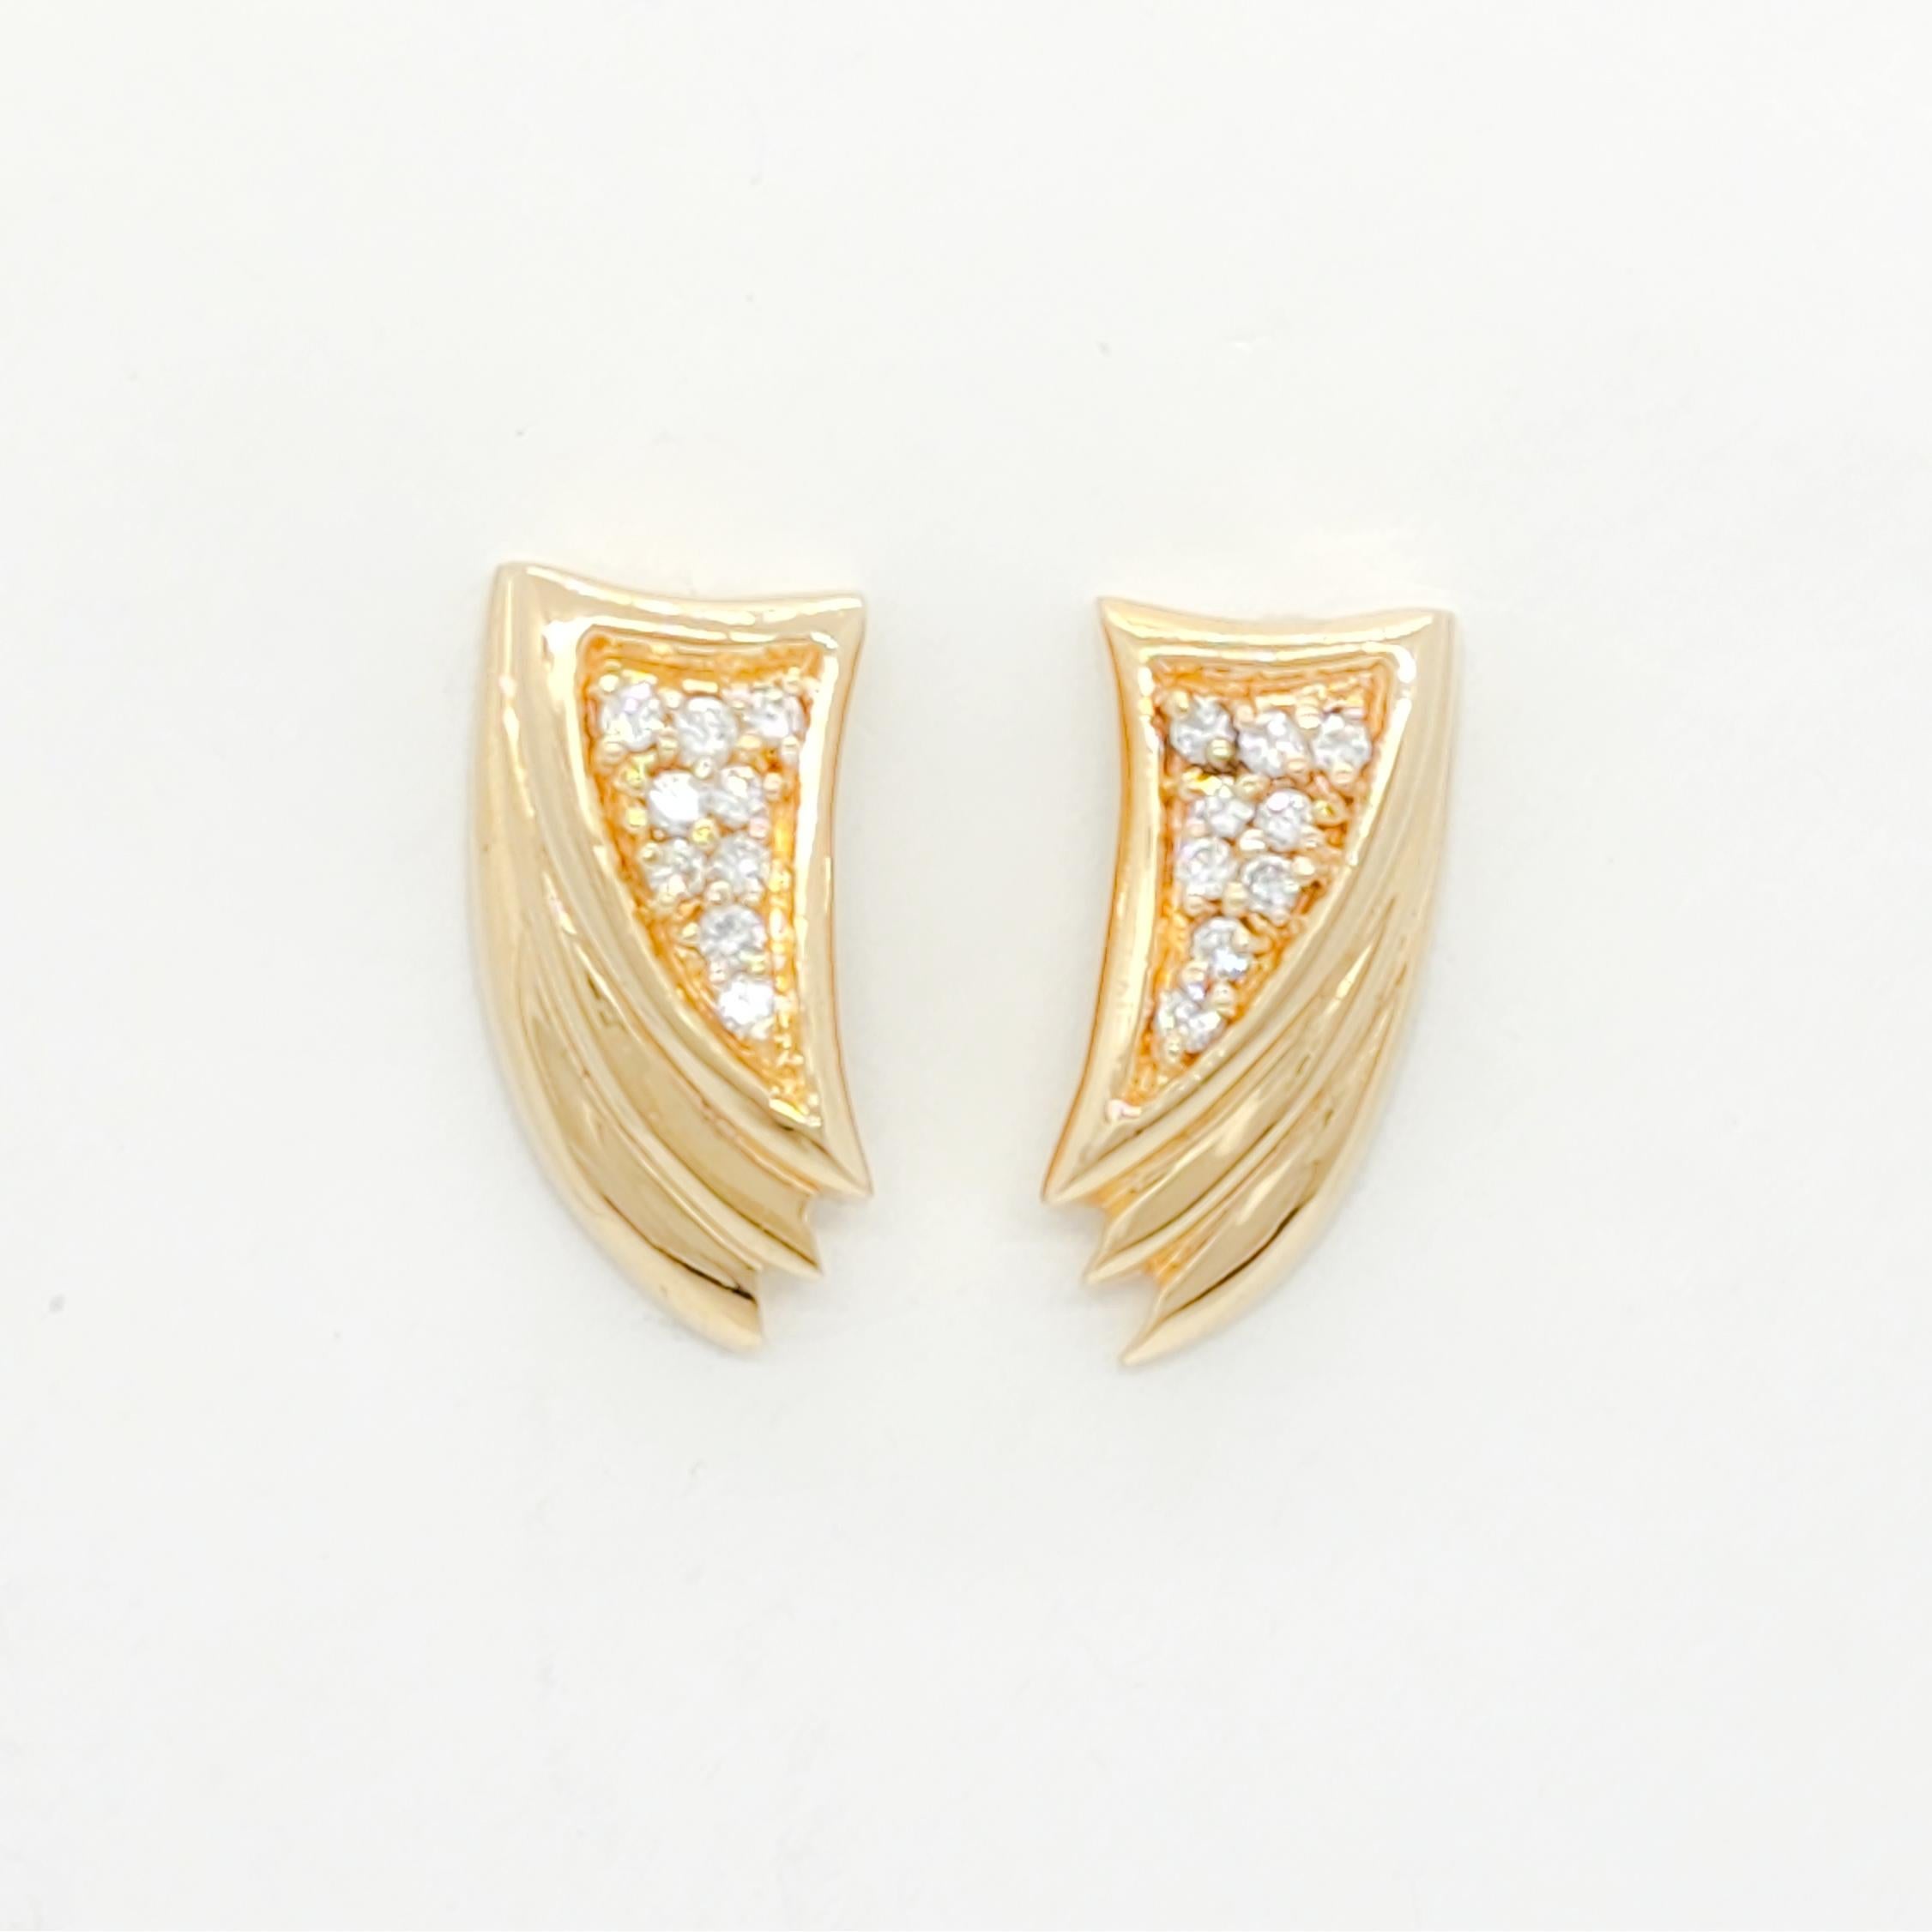 Beautiful earrings with 0.50 ct. good quality white diamond rounds.  Handmade in 14k yellow gold.  These earrings are fun and easy to wear for any occasion.  For pierced ears.